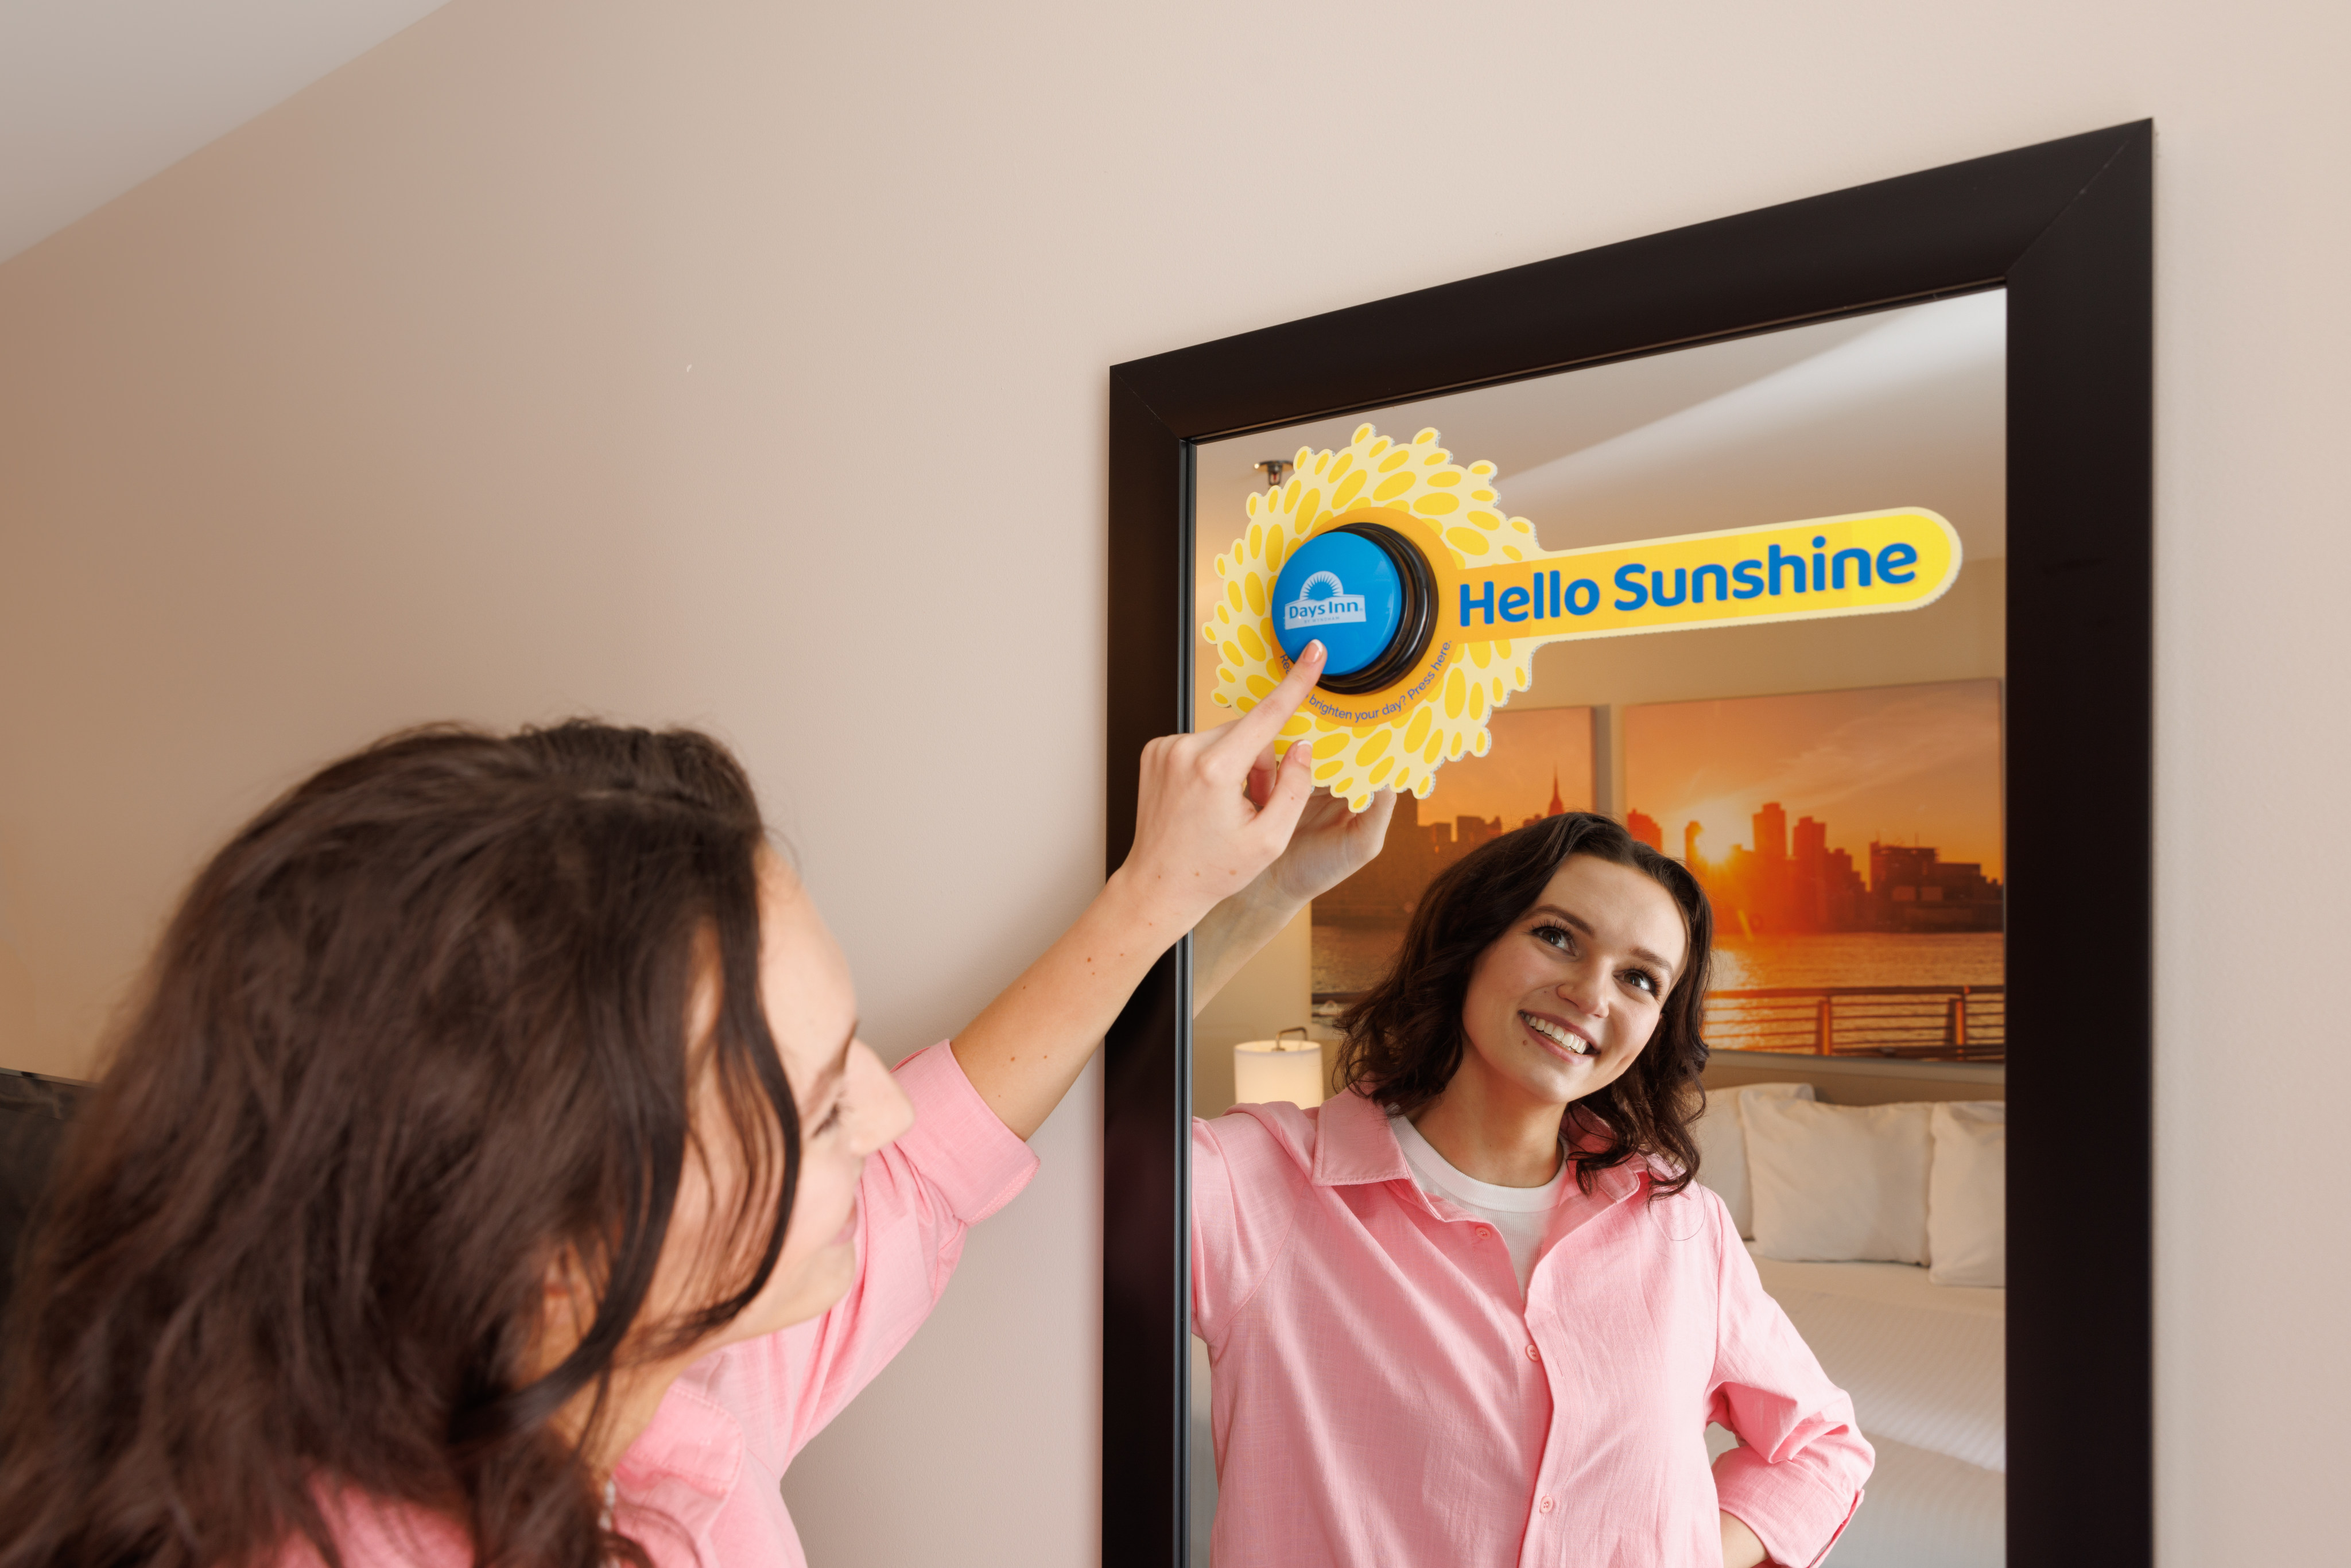 A talking mirror that gives guests compliments - including “Well you are just lighting up this room. Time to go spread some of that sunshine” - at a Days Inn hotel in the US. Photo: Days Inn